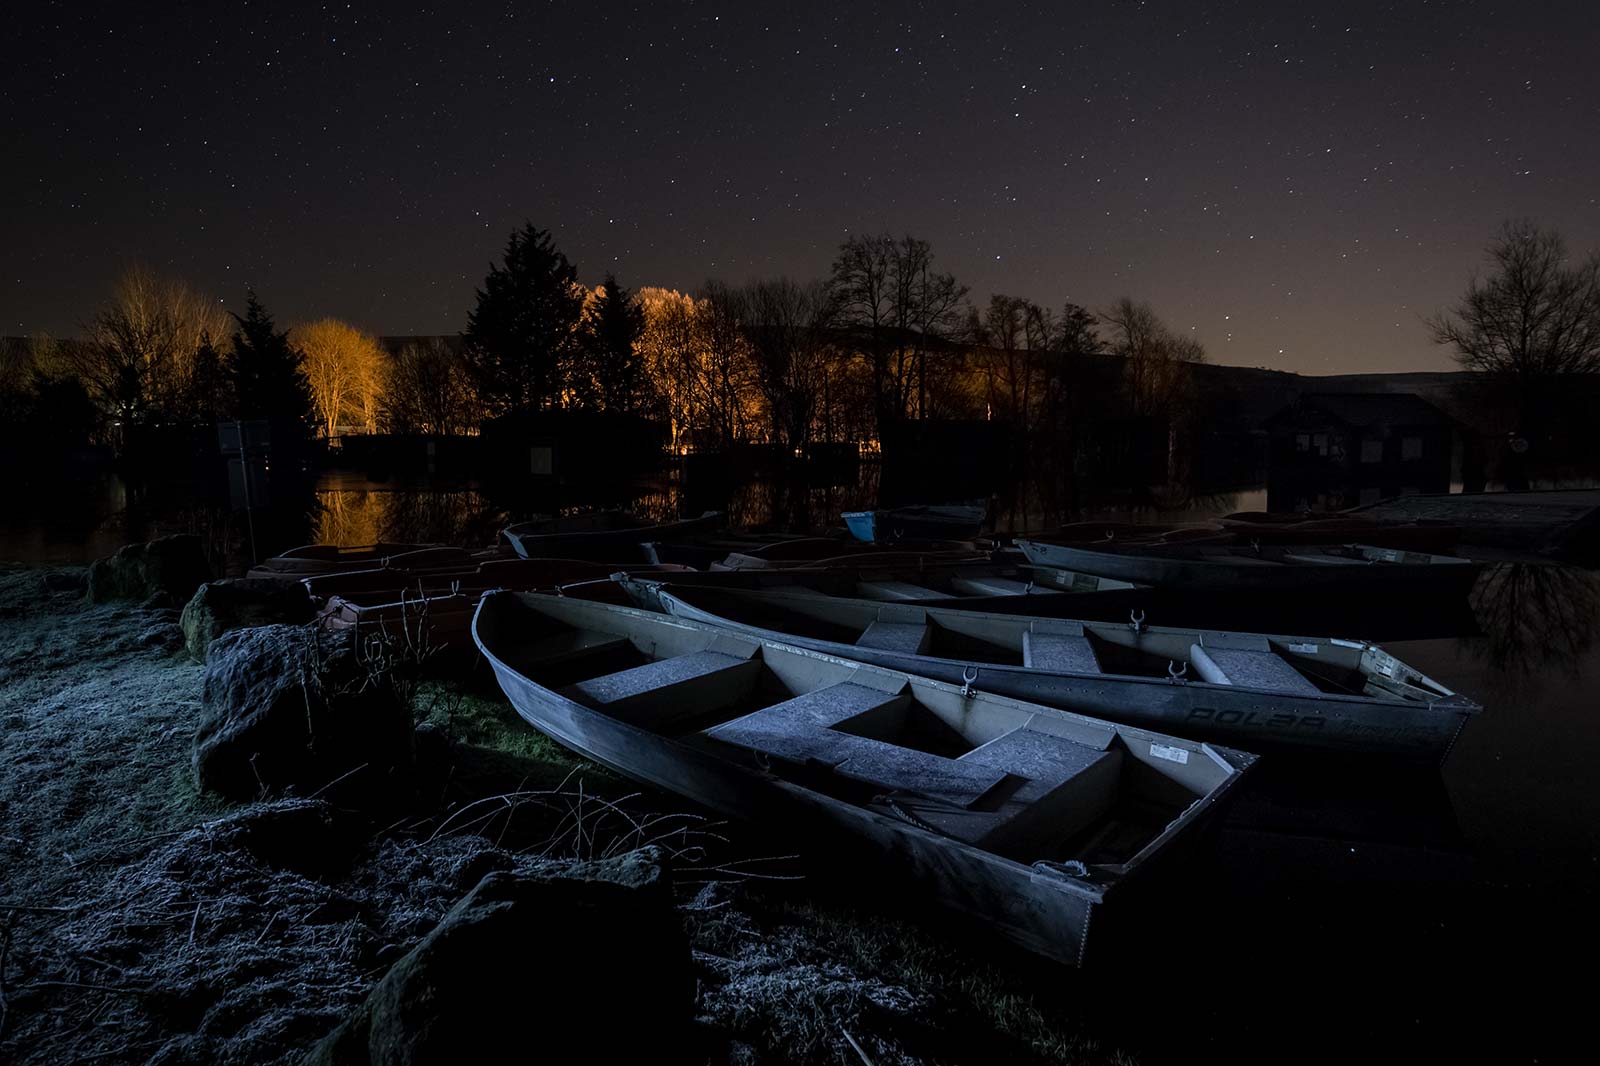 Frozen Boats Huddle For Warmth